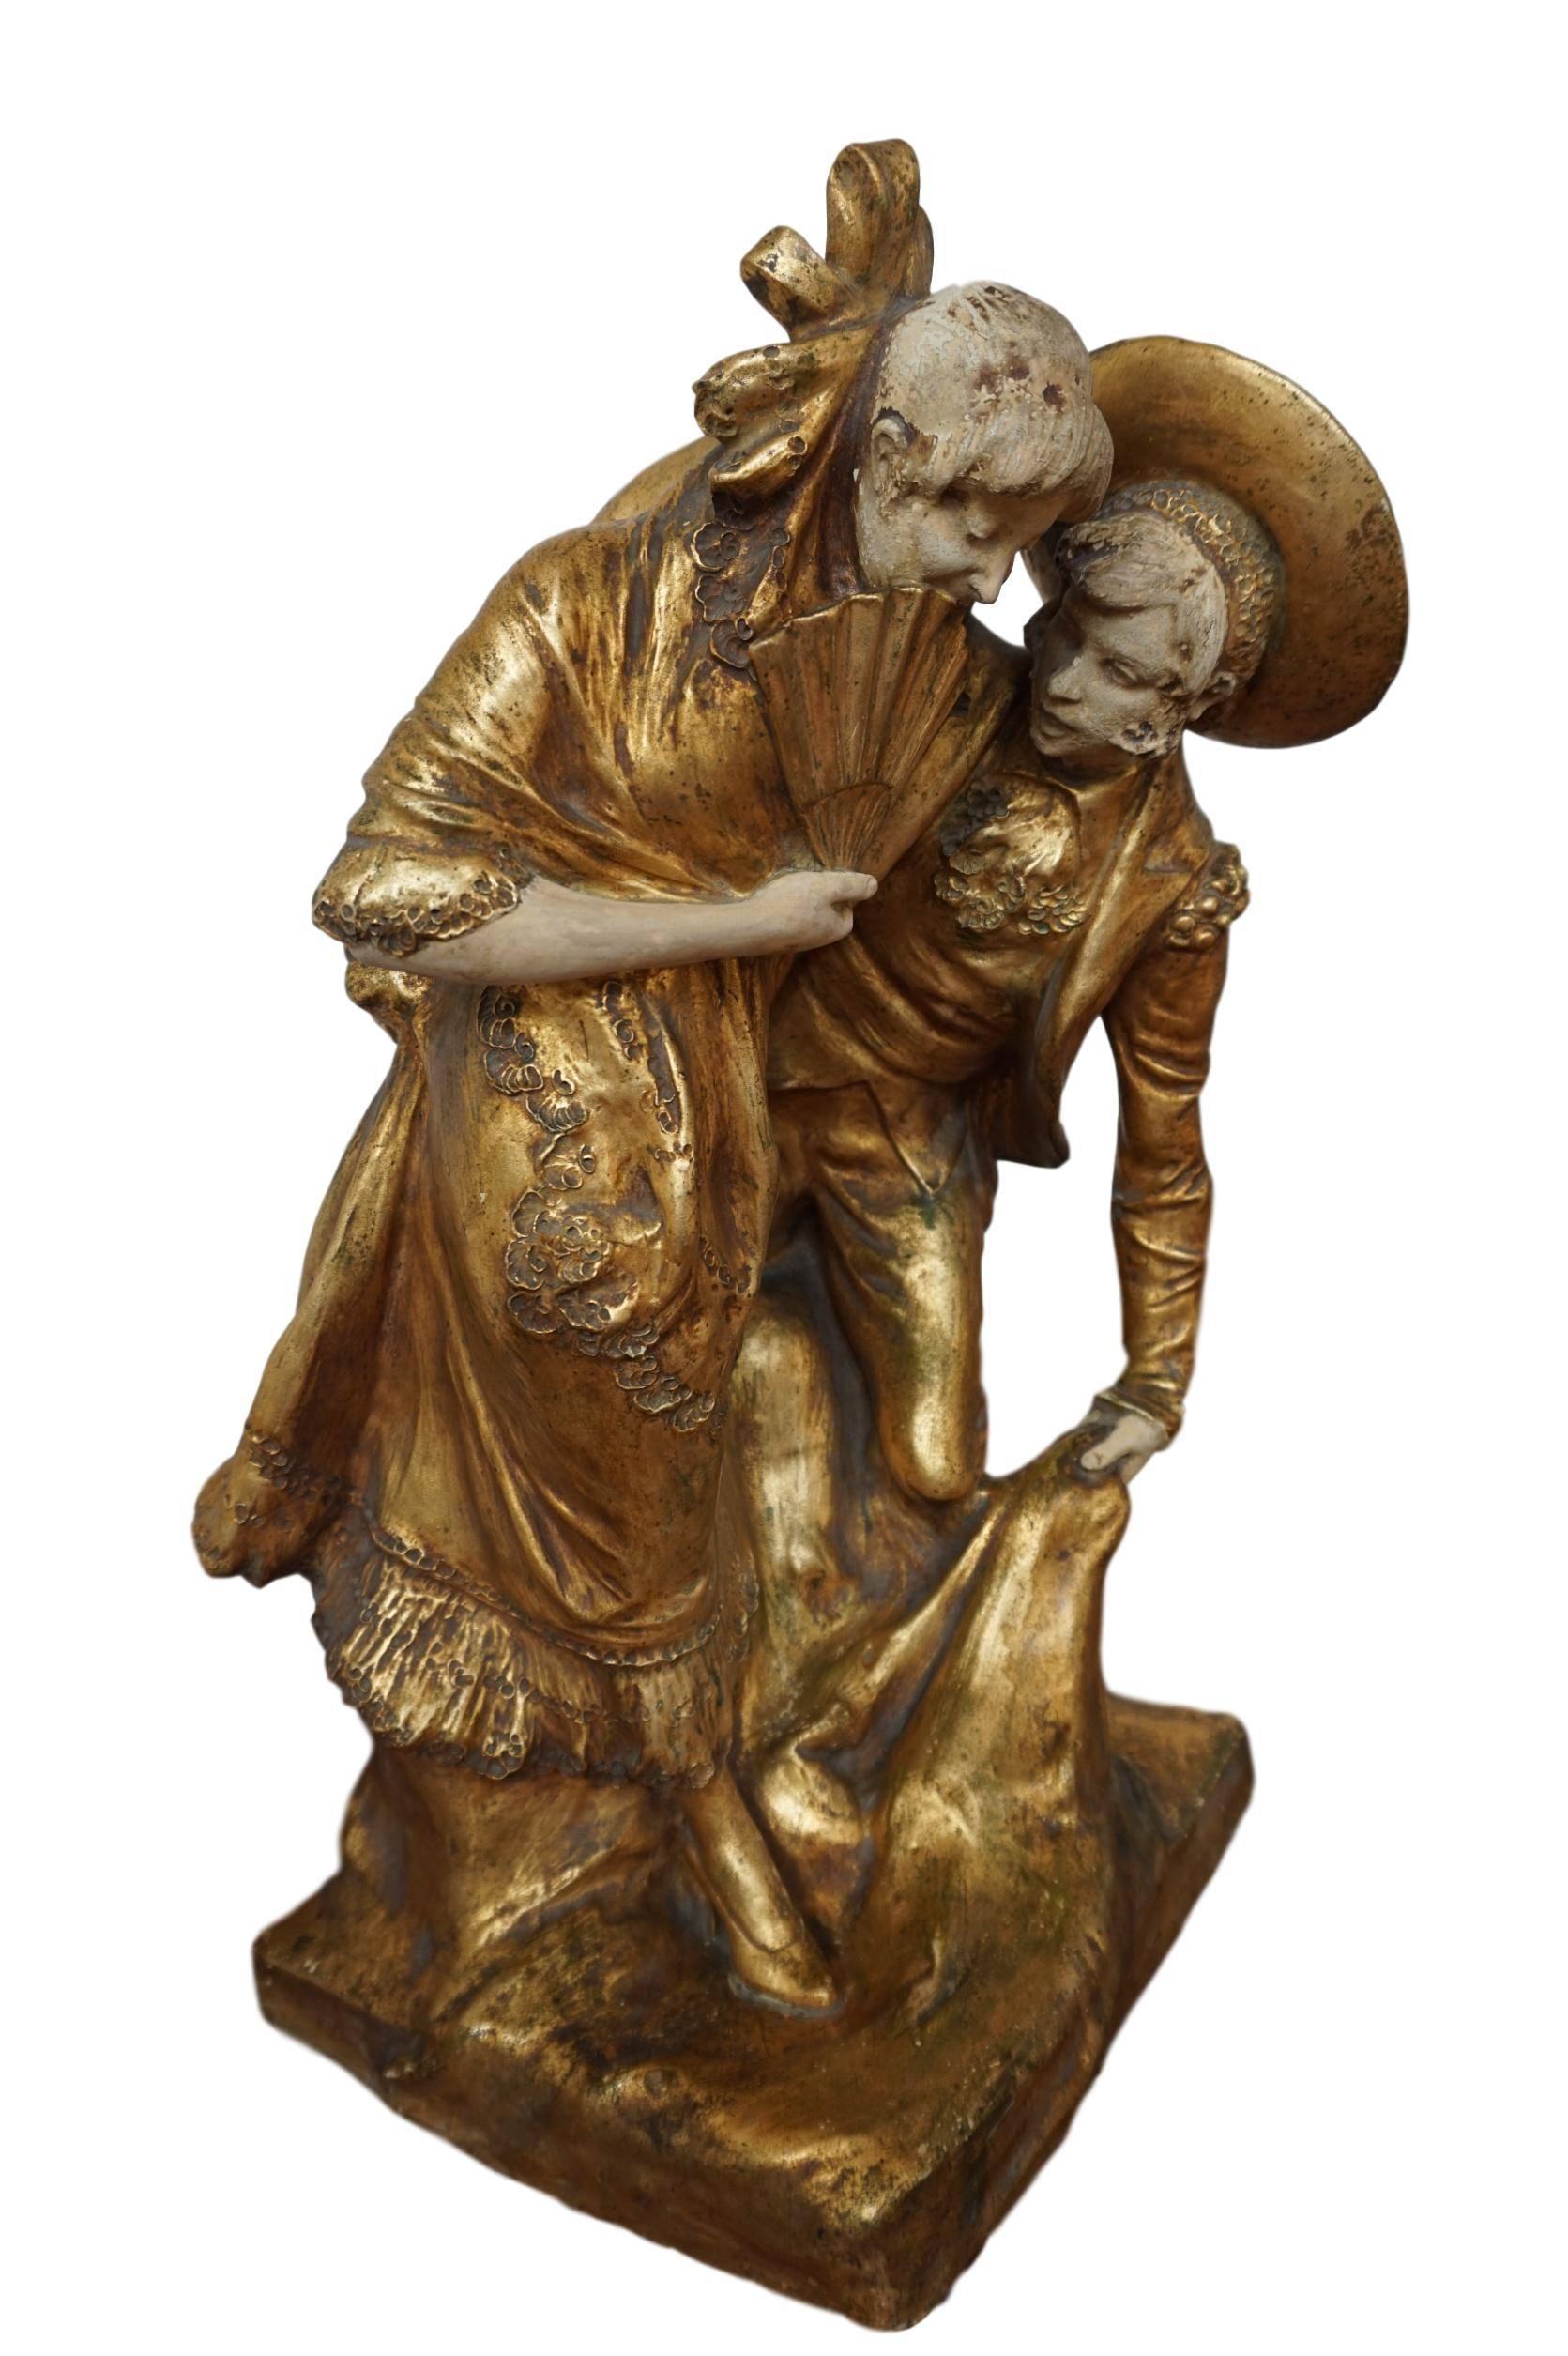 19th century Spanish painted and gilt terracotta statue depicting a loving couple.
This beautiful, statue was crafted in Valencia, Spanish, circa 1860. The statue shows a traditional pose of this period. The sculpture has its original painted